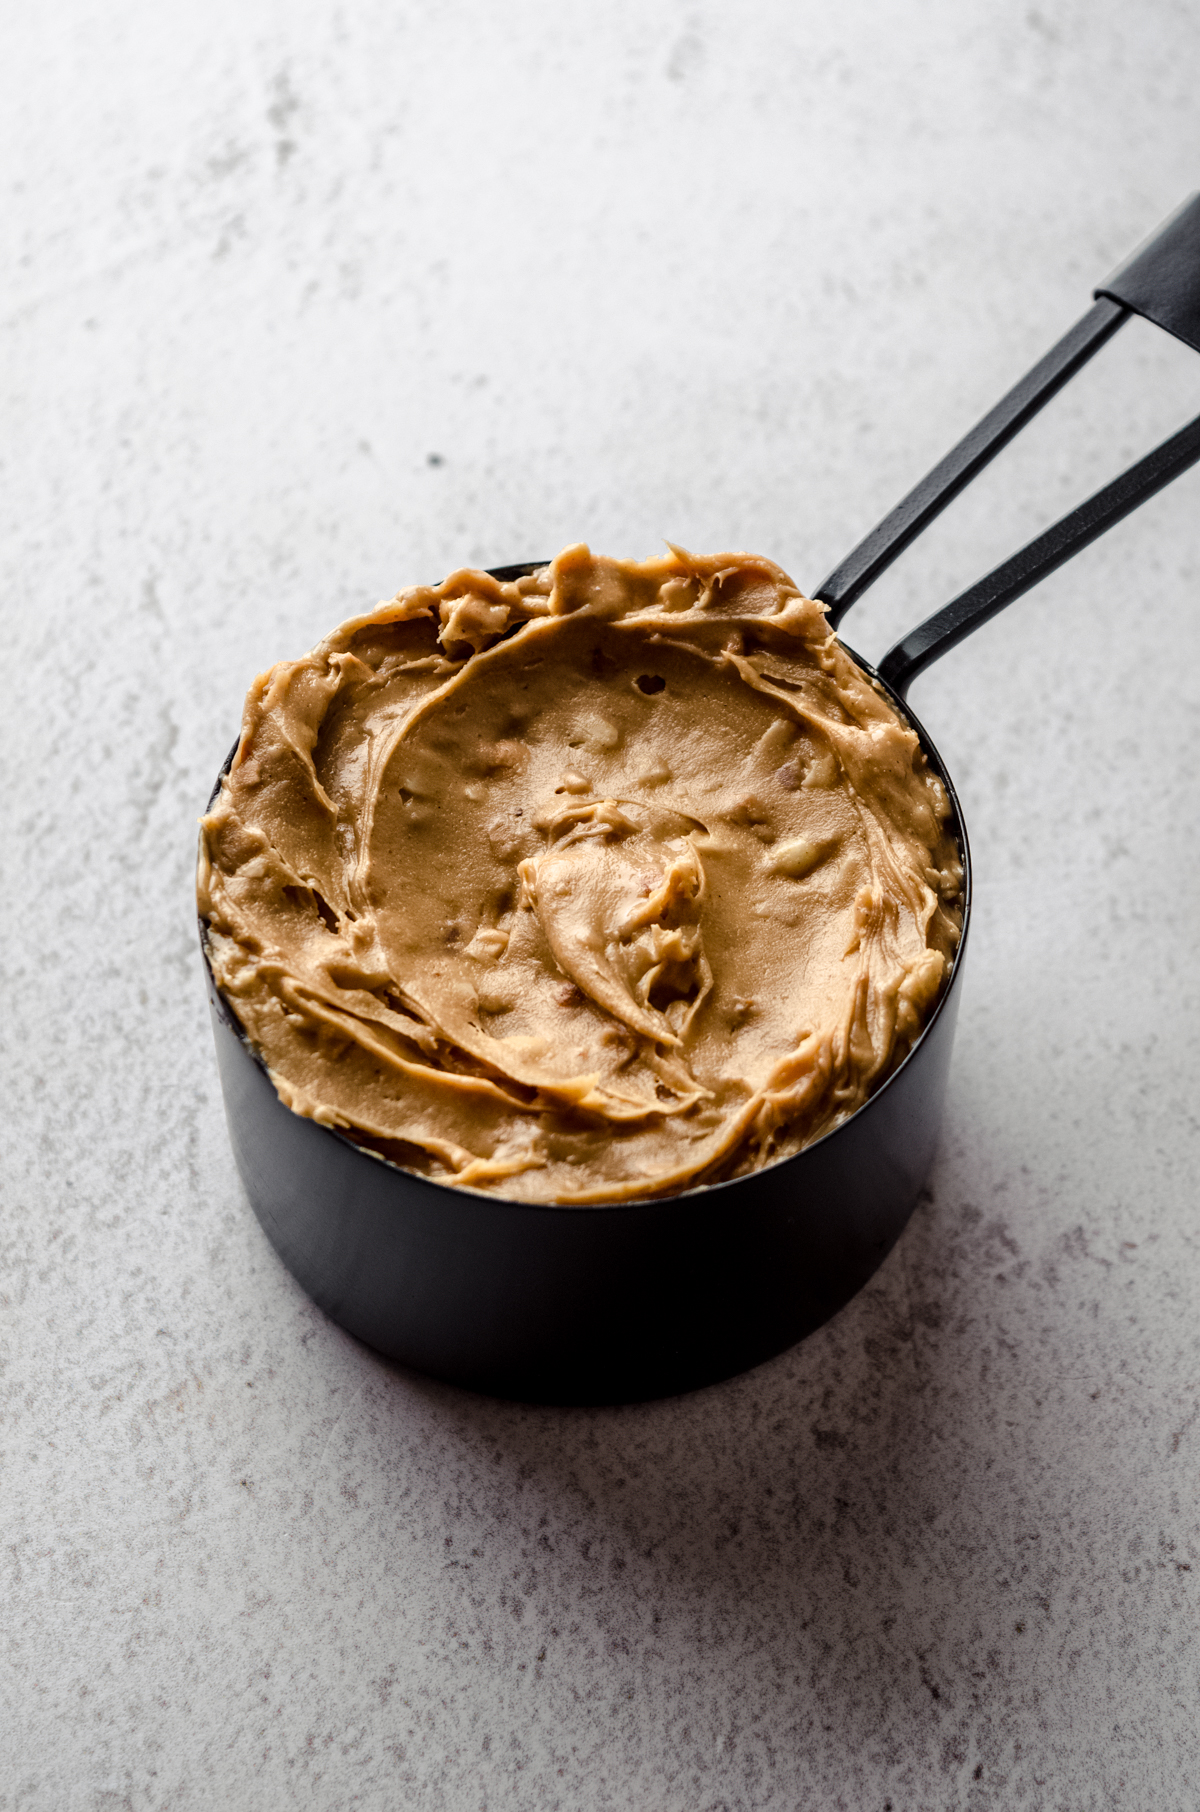 Crunchy peanut butter in a black measuring cup.